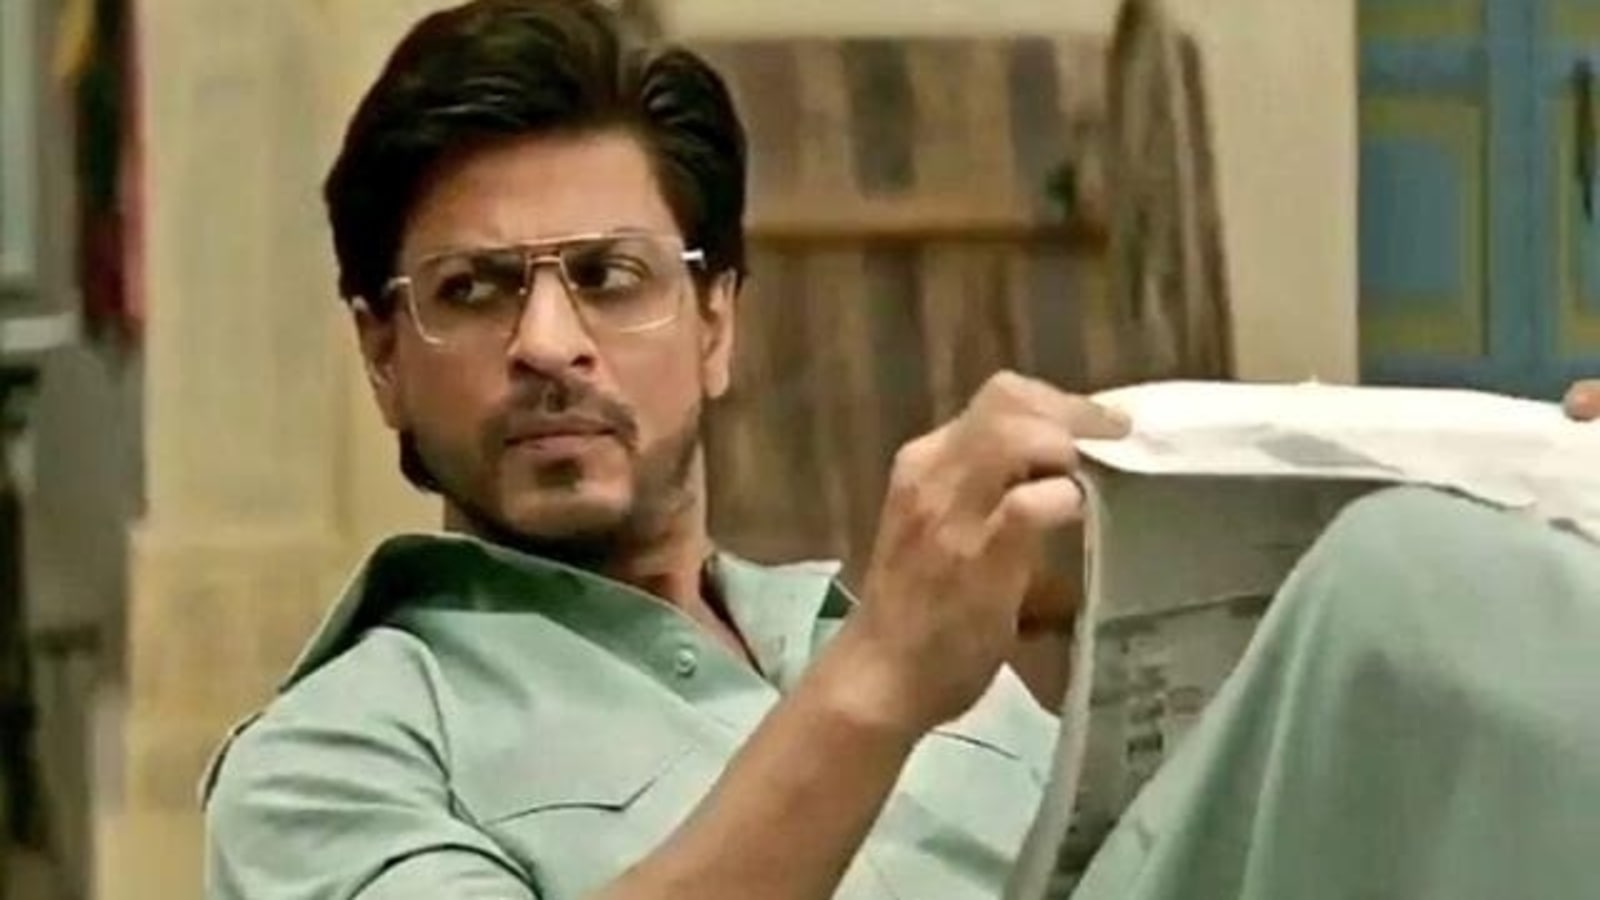 Better if Shah Rukh Khan asked to apologise: Court on Raees ...